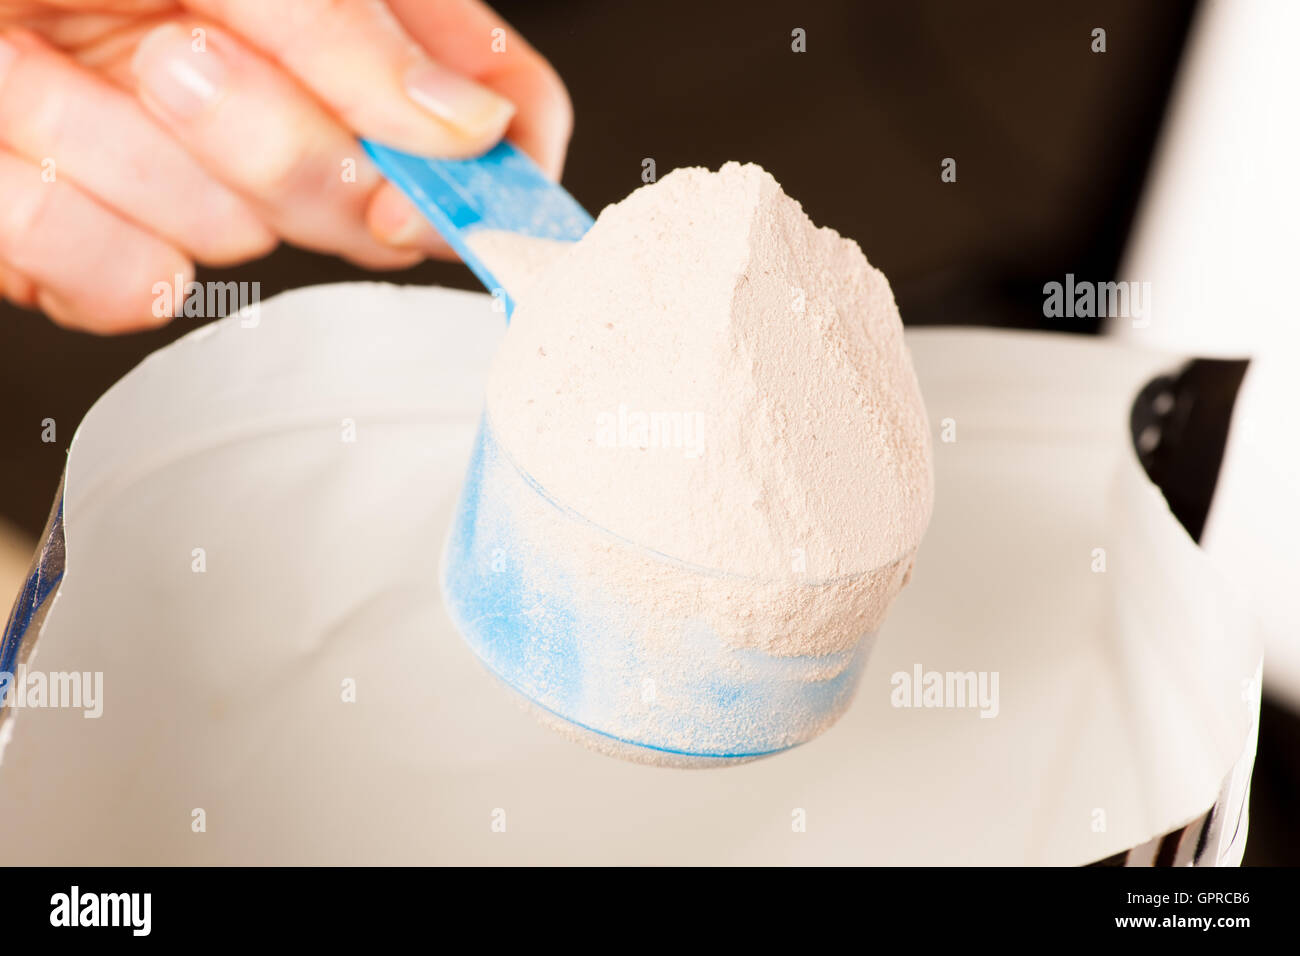 Heaped measuring scoop of whey protein powder with chocolate flavor. Stock Photo